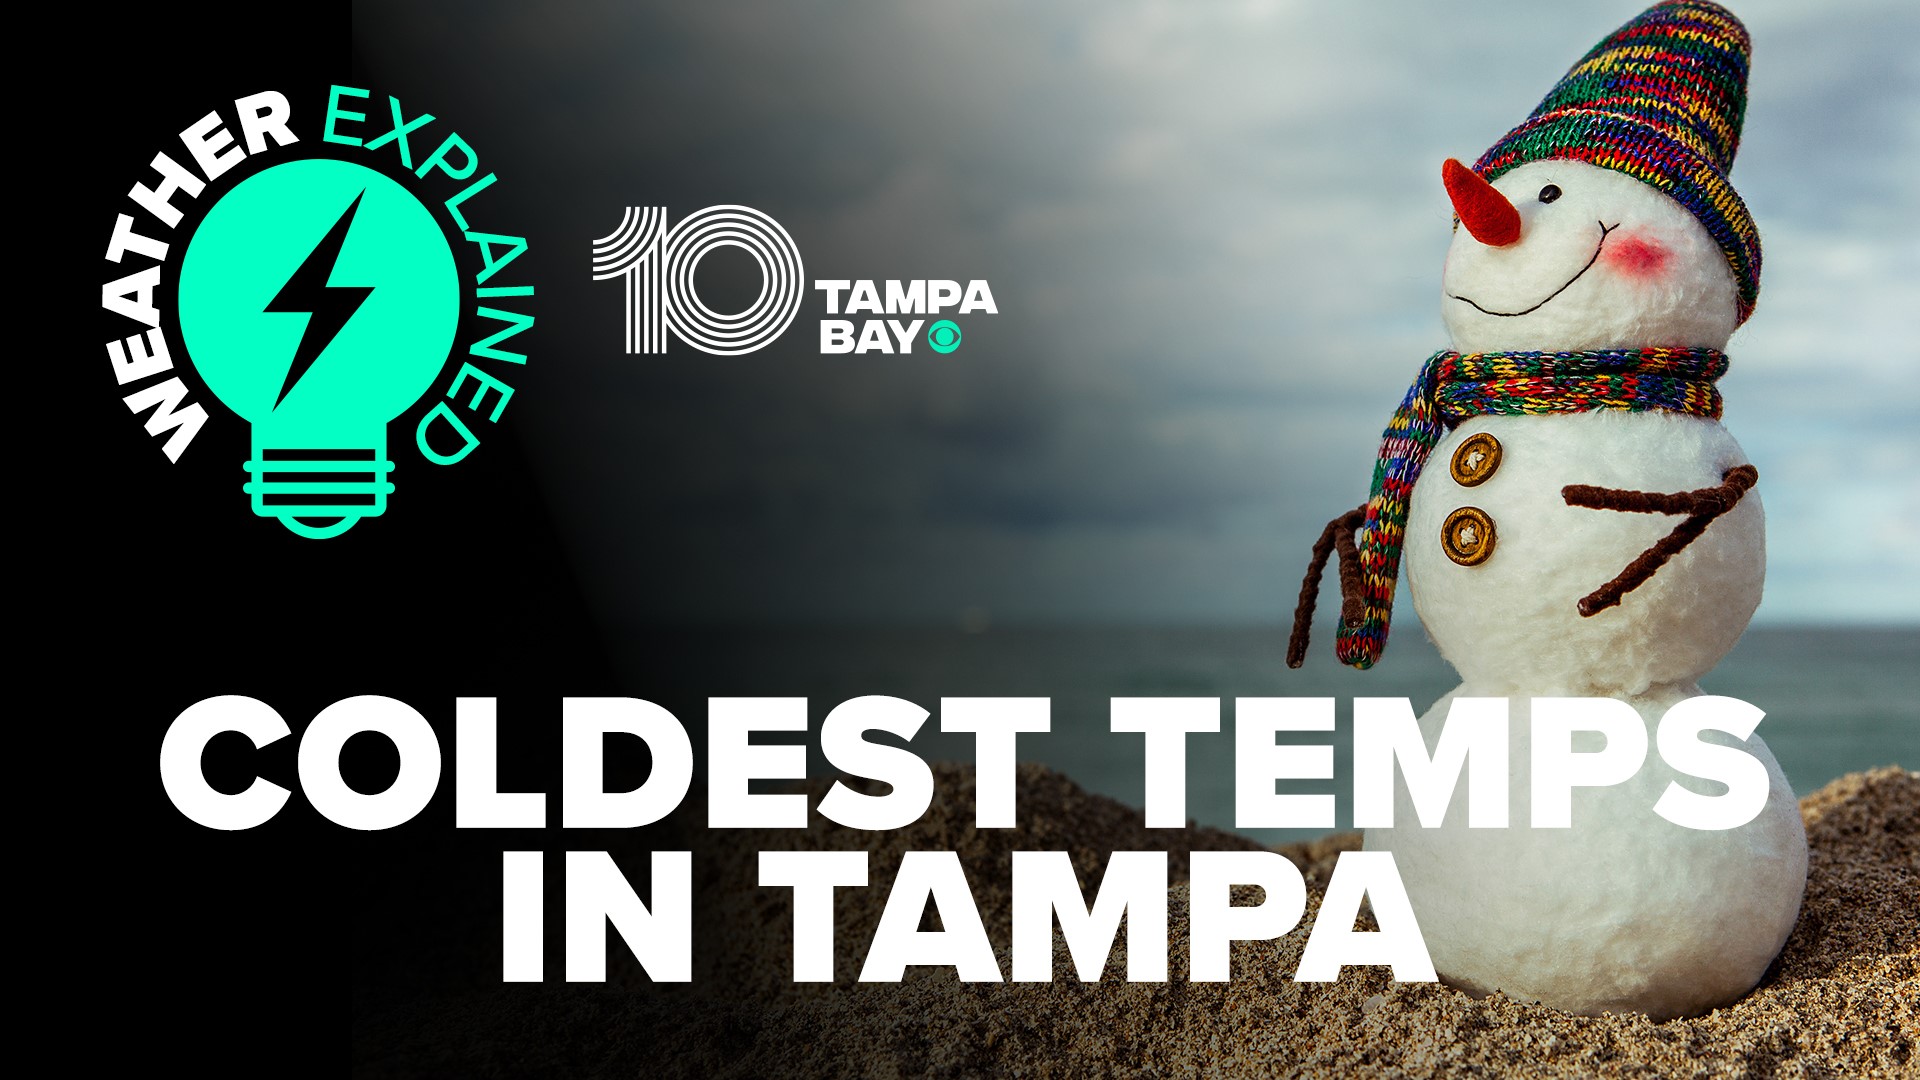 10 Tampa Bay meteorologist Natalie Ferrari details how cold it's ever gotten in the Tampa Bay area.